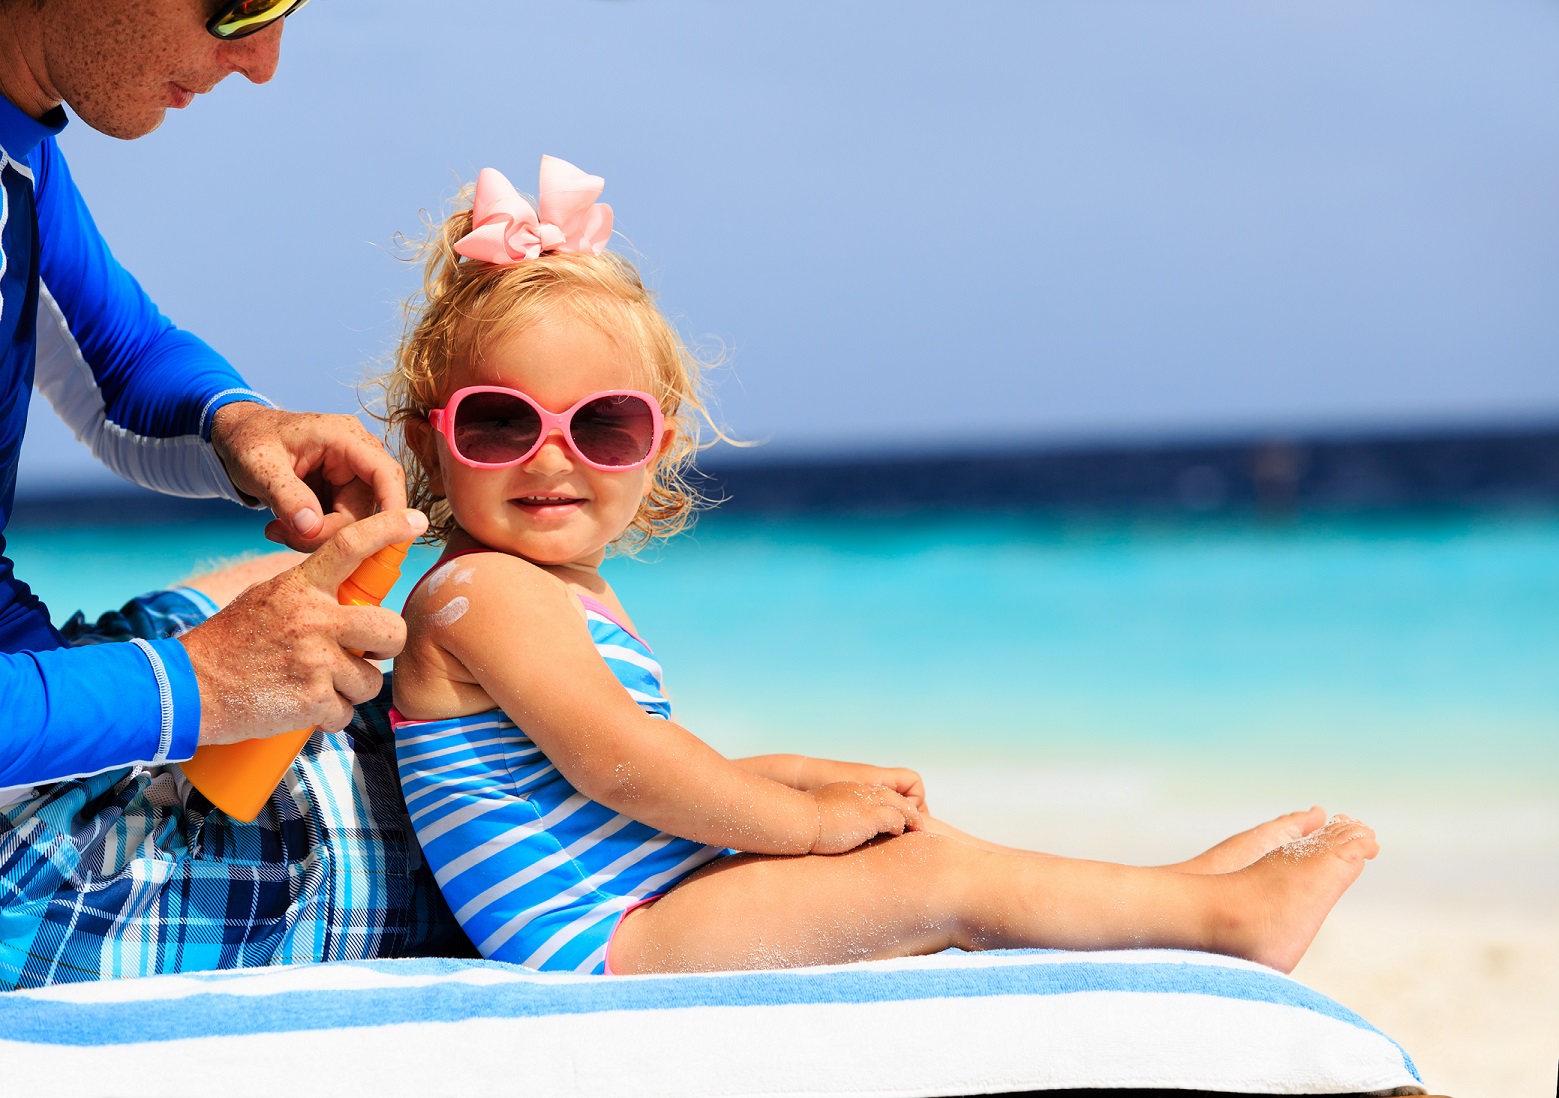 A photo of a blonde little girl wearing sunglasses, with her father who is applying sunscreen.